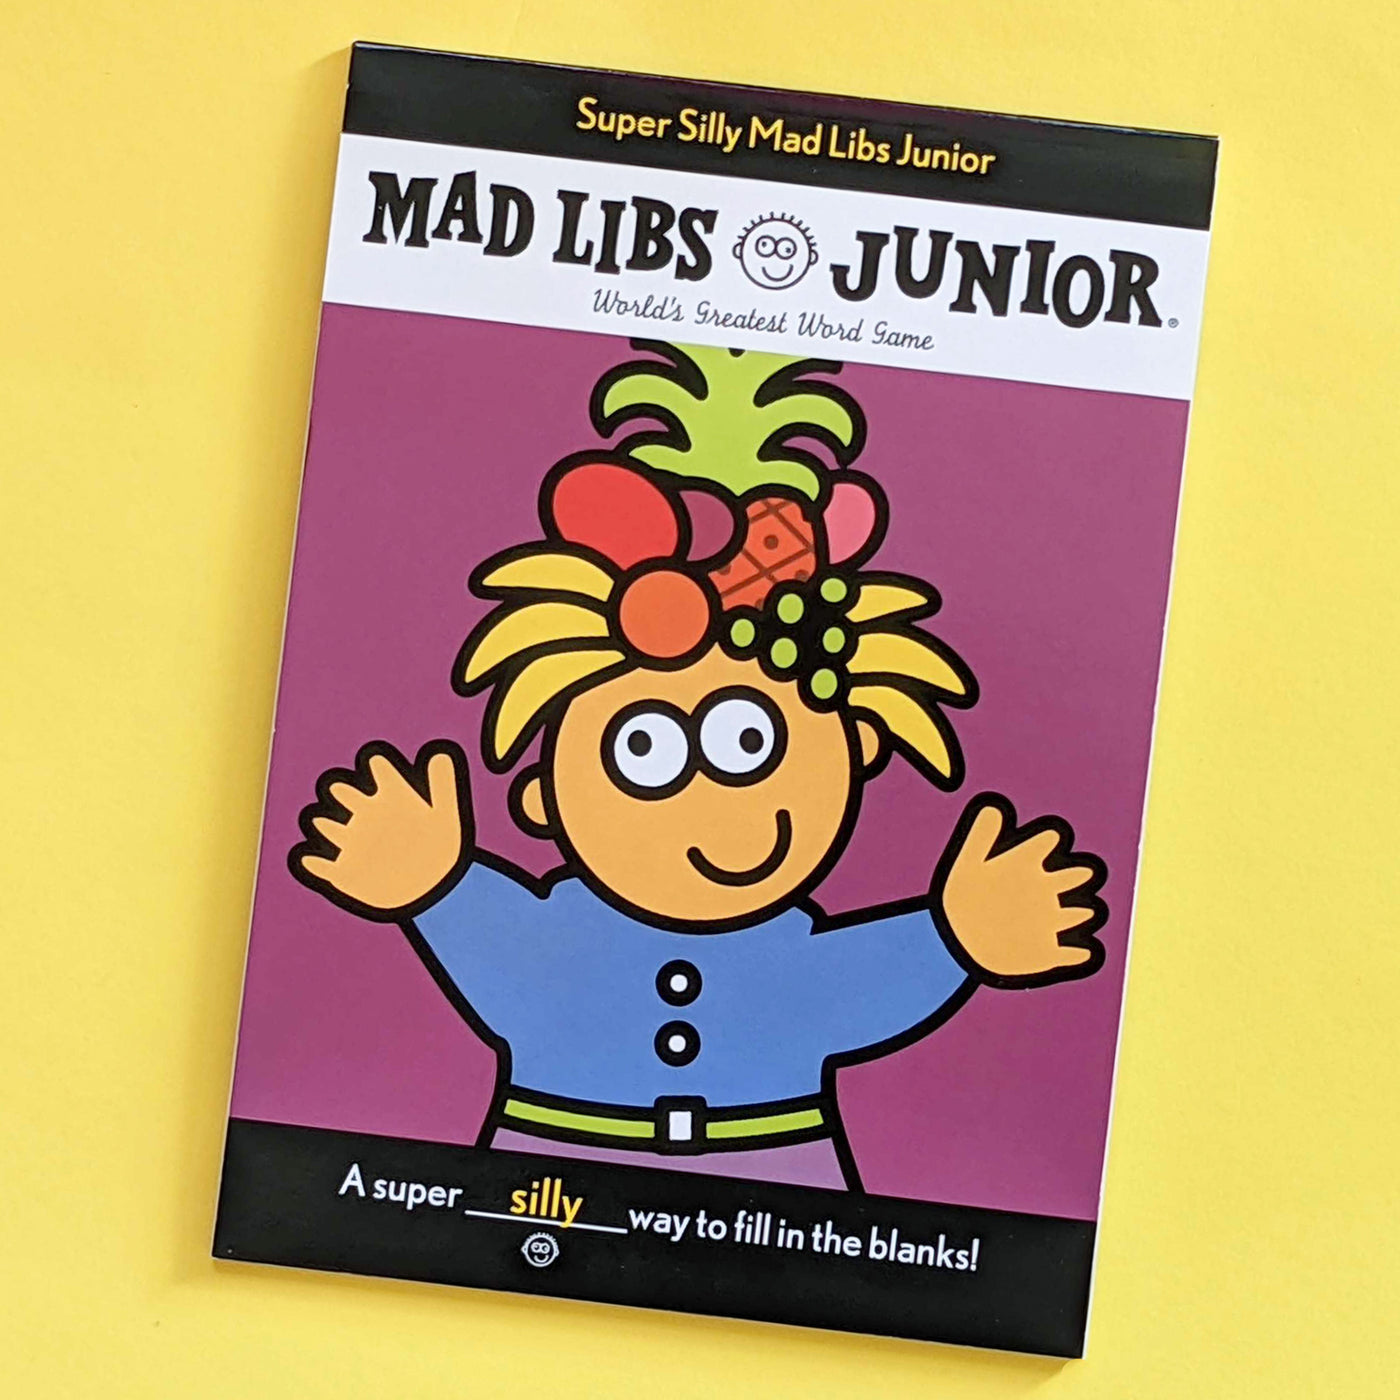 Super Silly Mad Libs Junior: World's Greatest Word Game by Roger Price